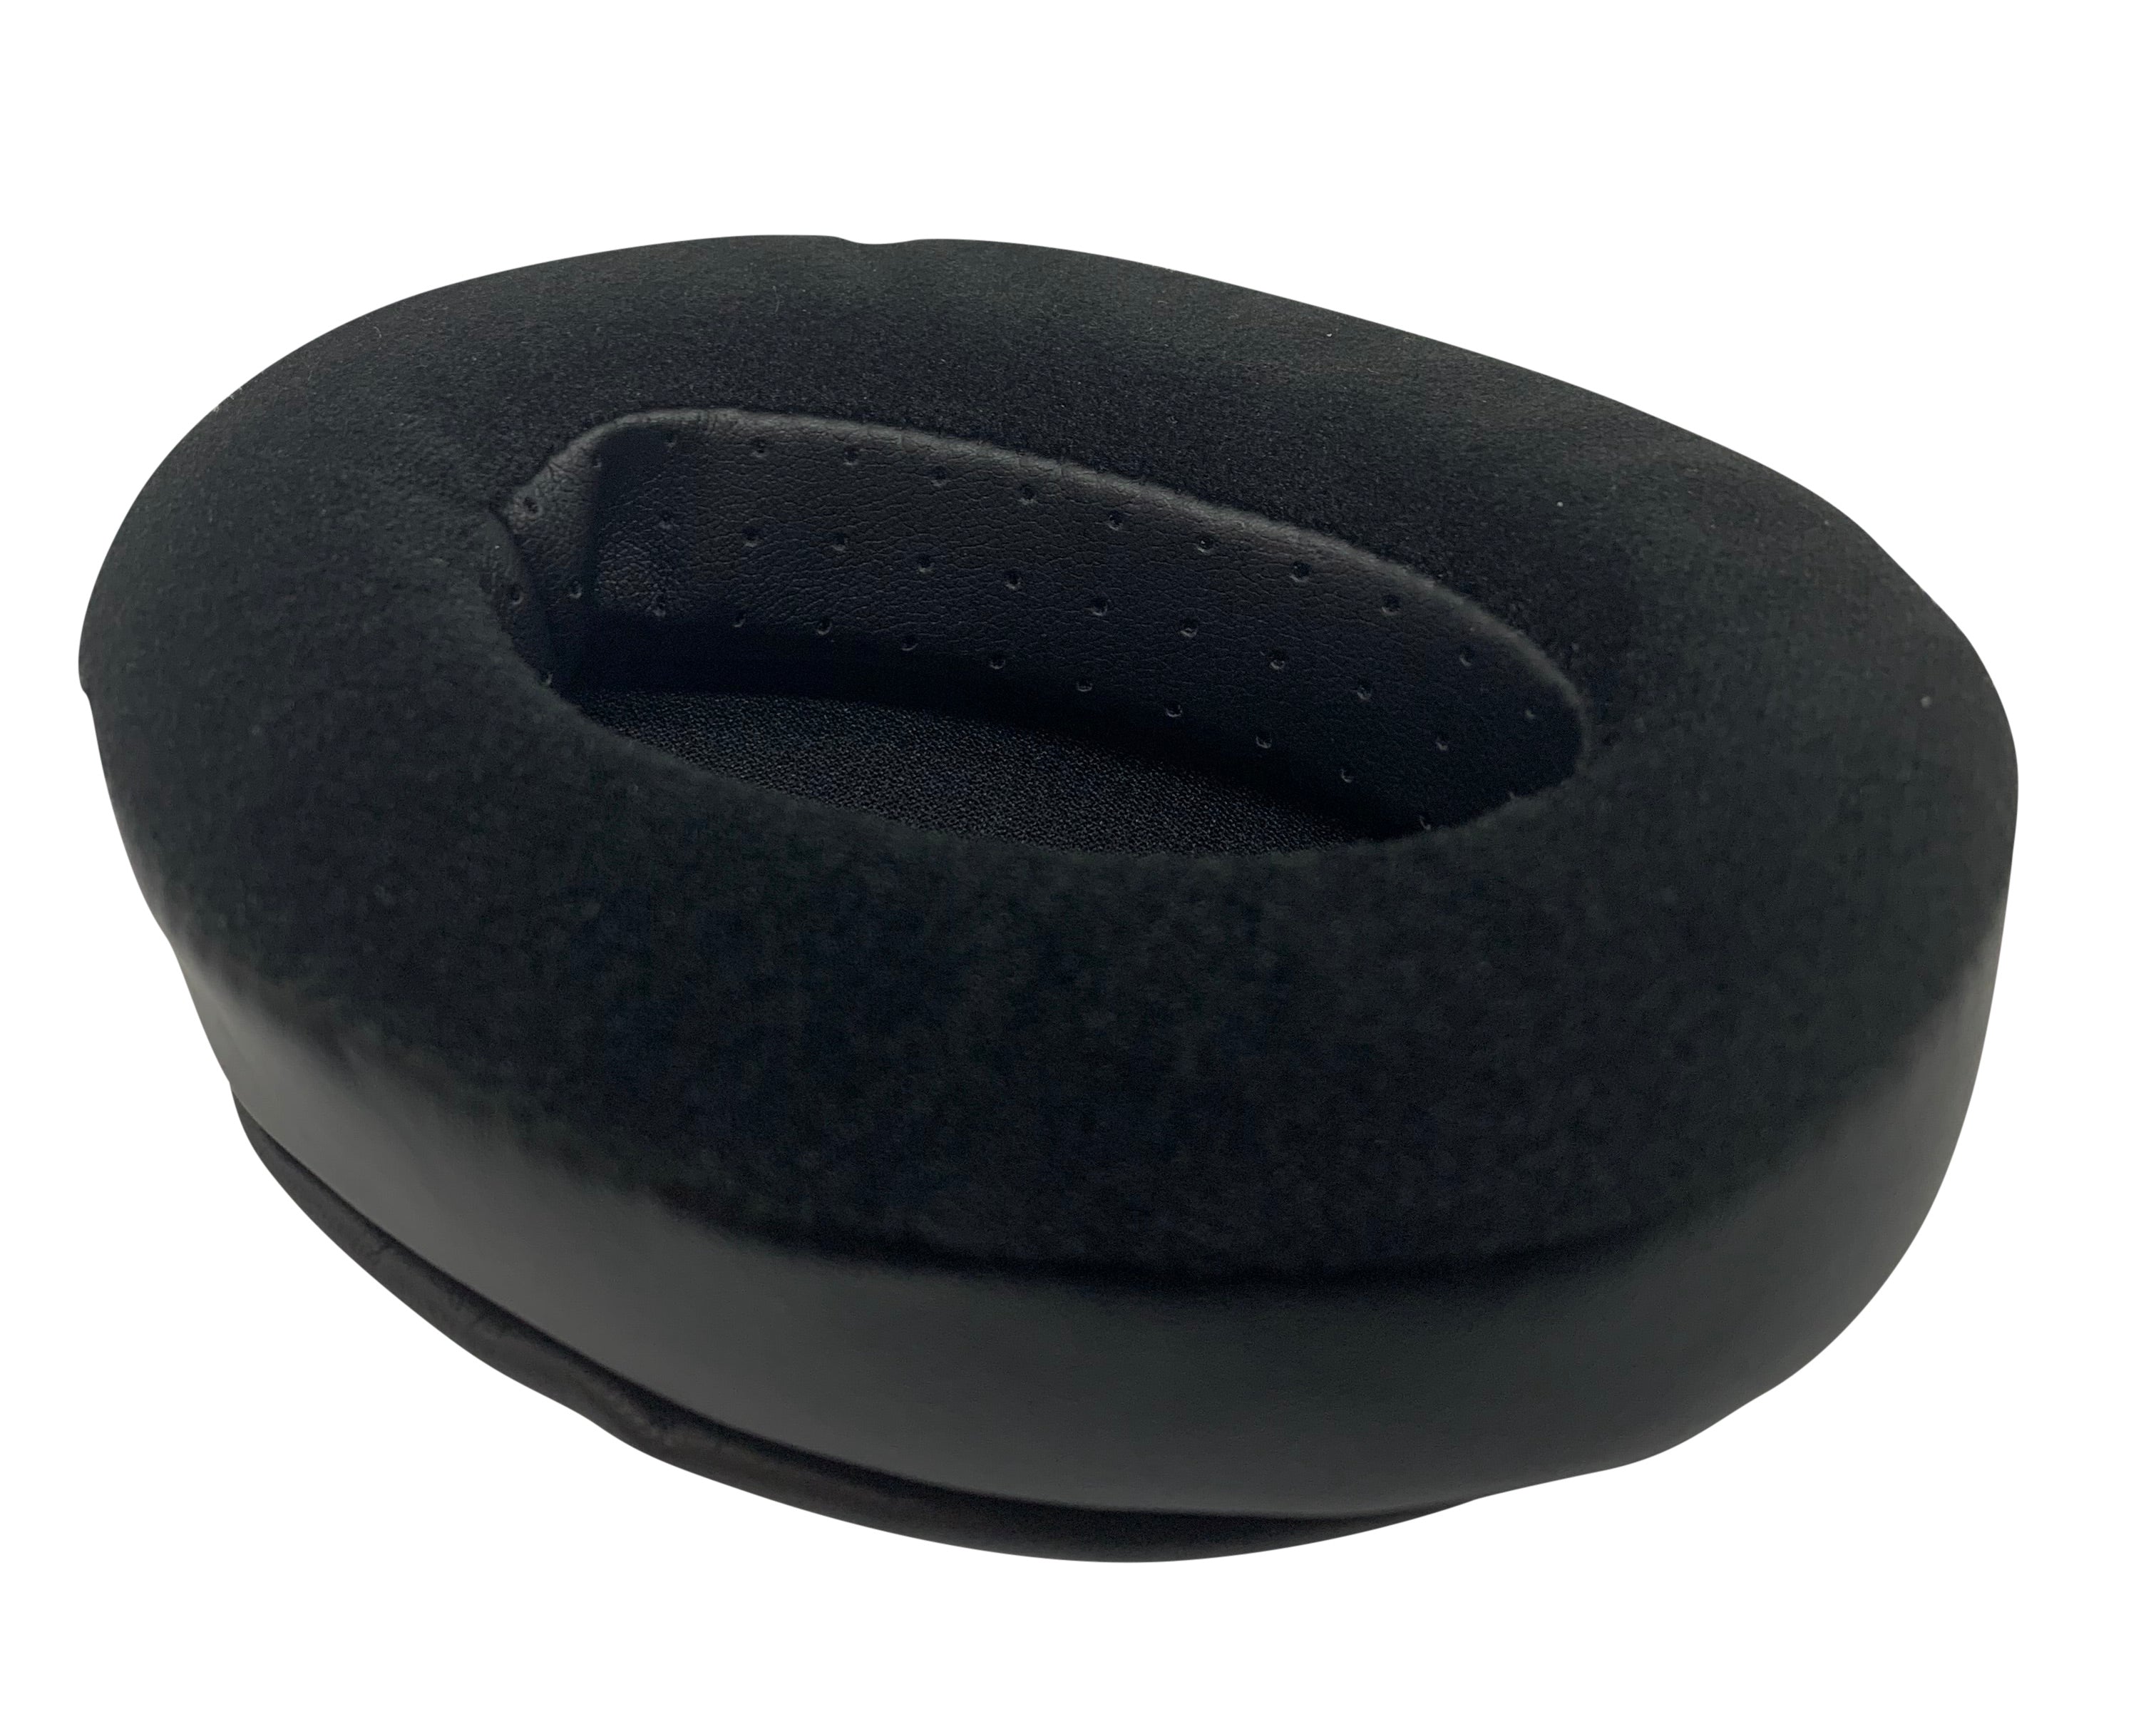 CentralSound Premium XL Memory Foam Universal Oval Ear Pad Cushion Replacements - CentralSound